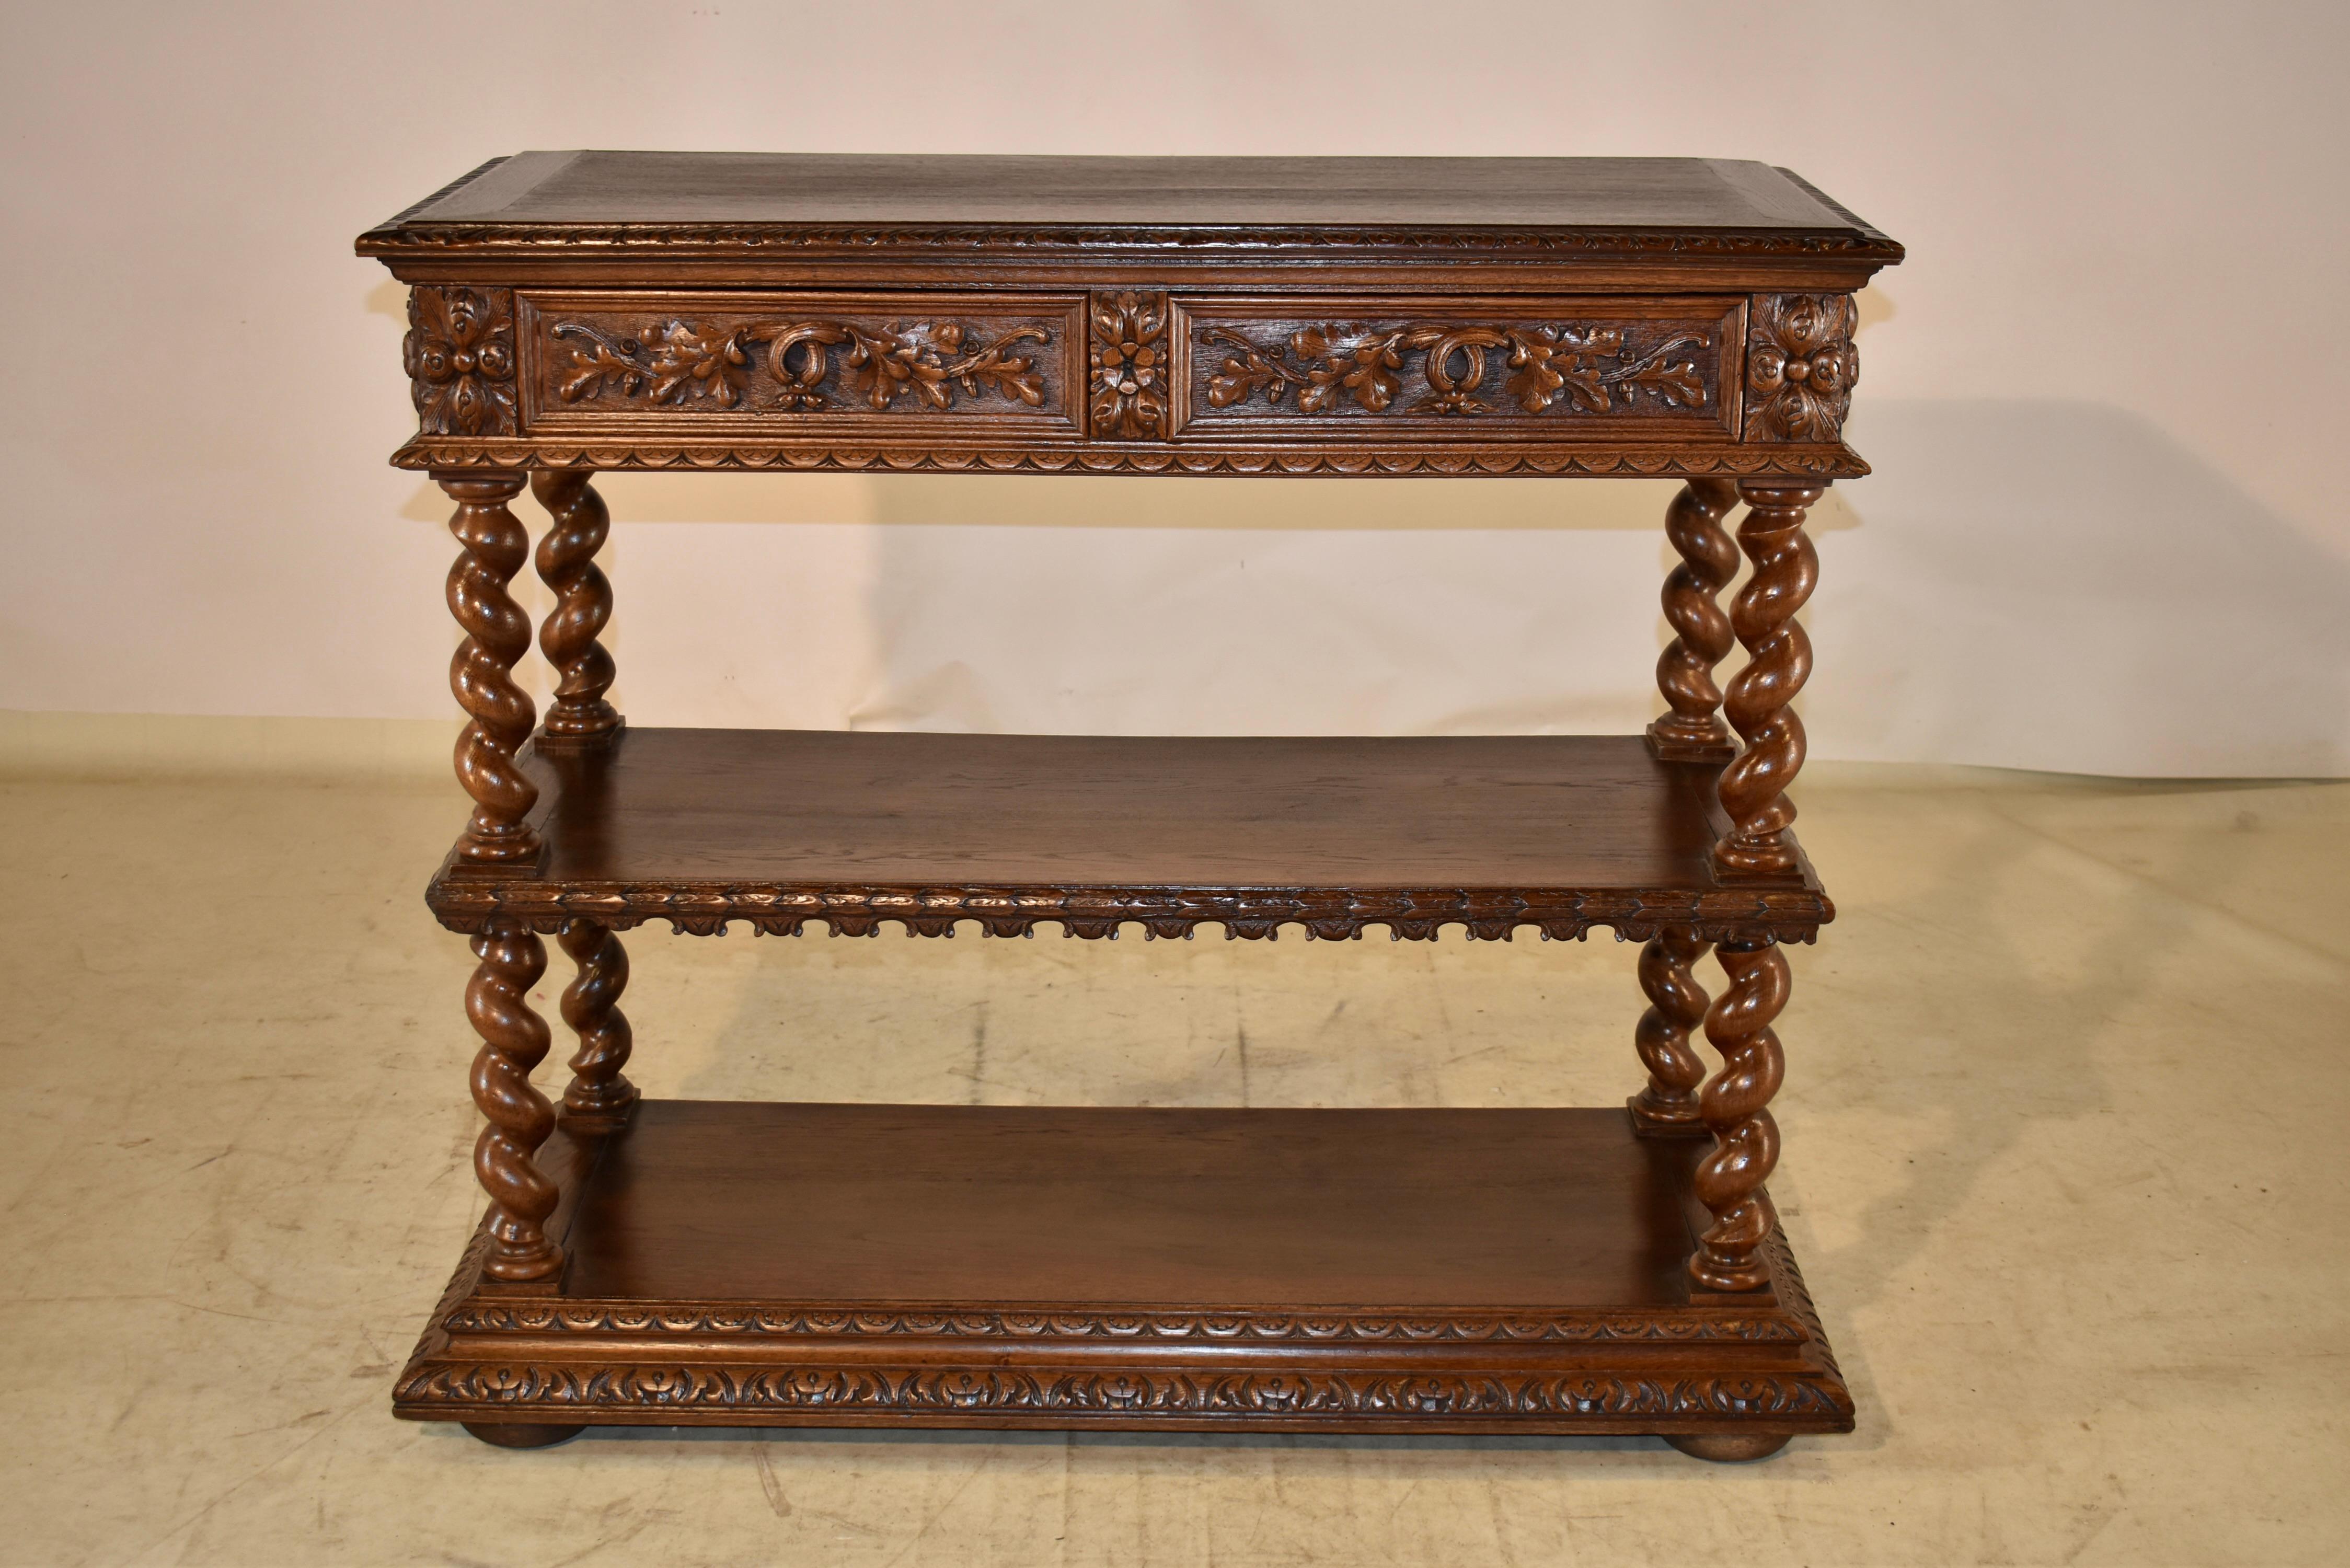 19th century oak dessert buffet from France. the top is banded and has a beveled and hand carved edge, following down to paneled and hand carved decorated aprons on the sides and two drawers in the same style in the front of the piece. The drawers